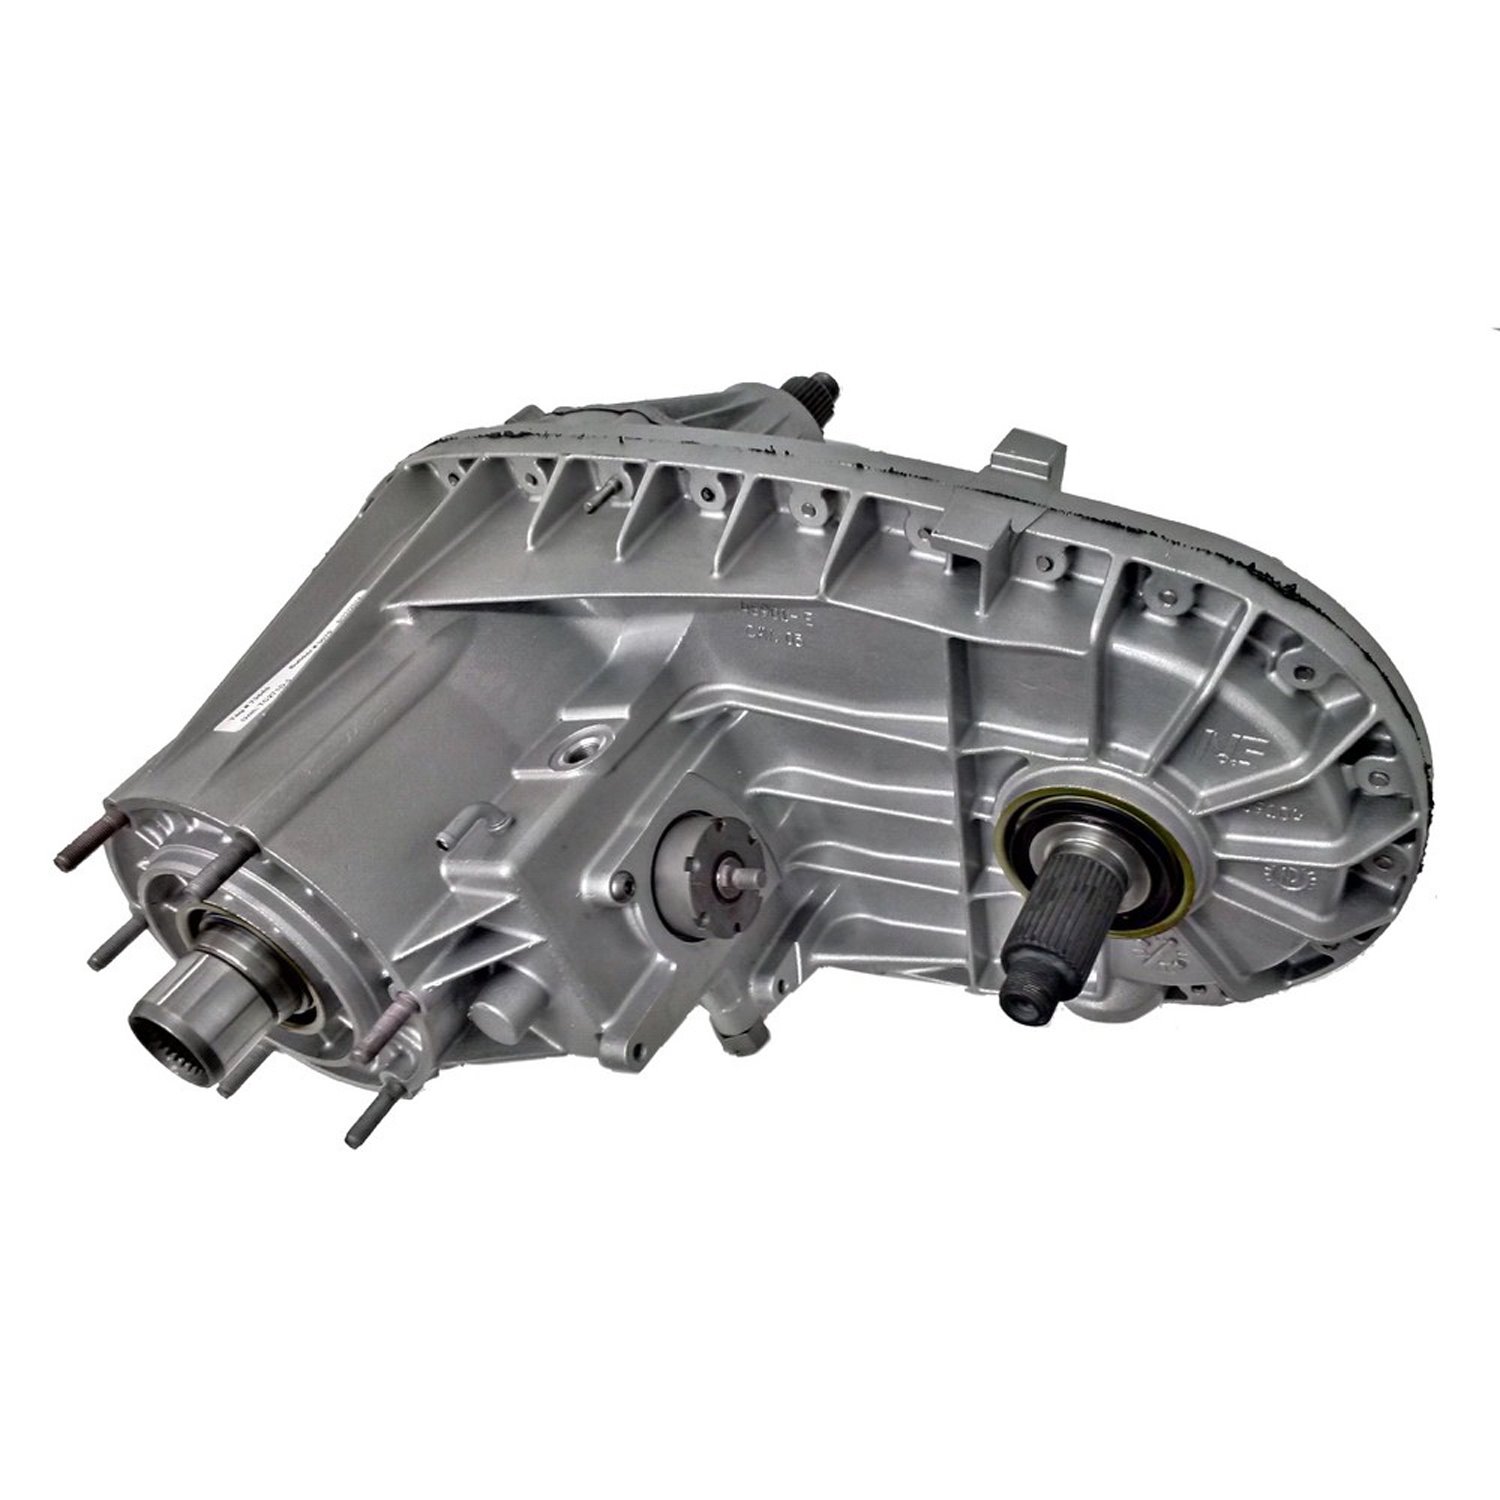 Remanufactured NP271 Transfer Case for Ford 99-04 F-series